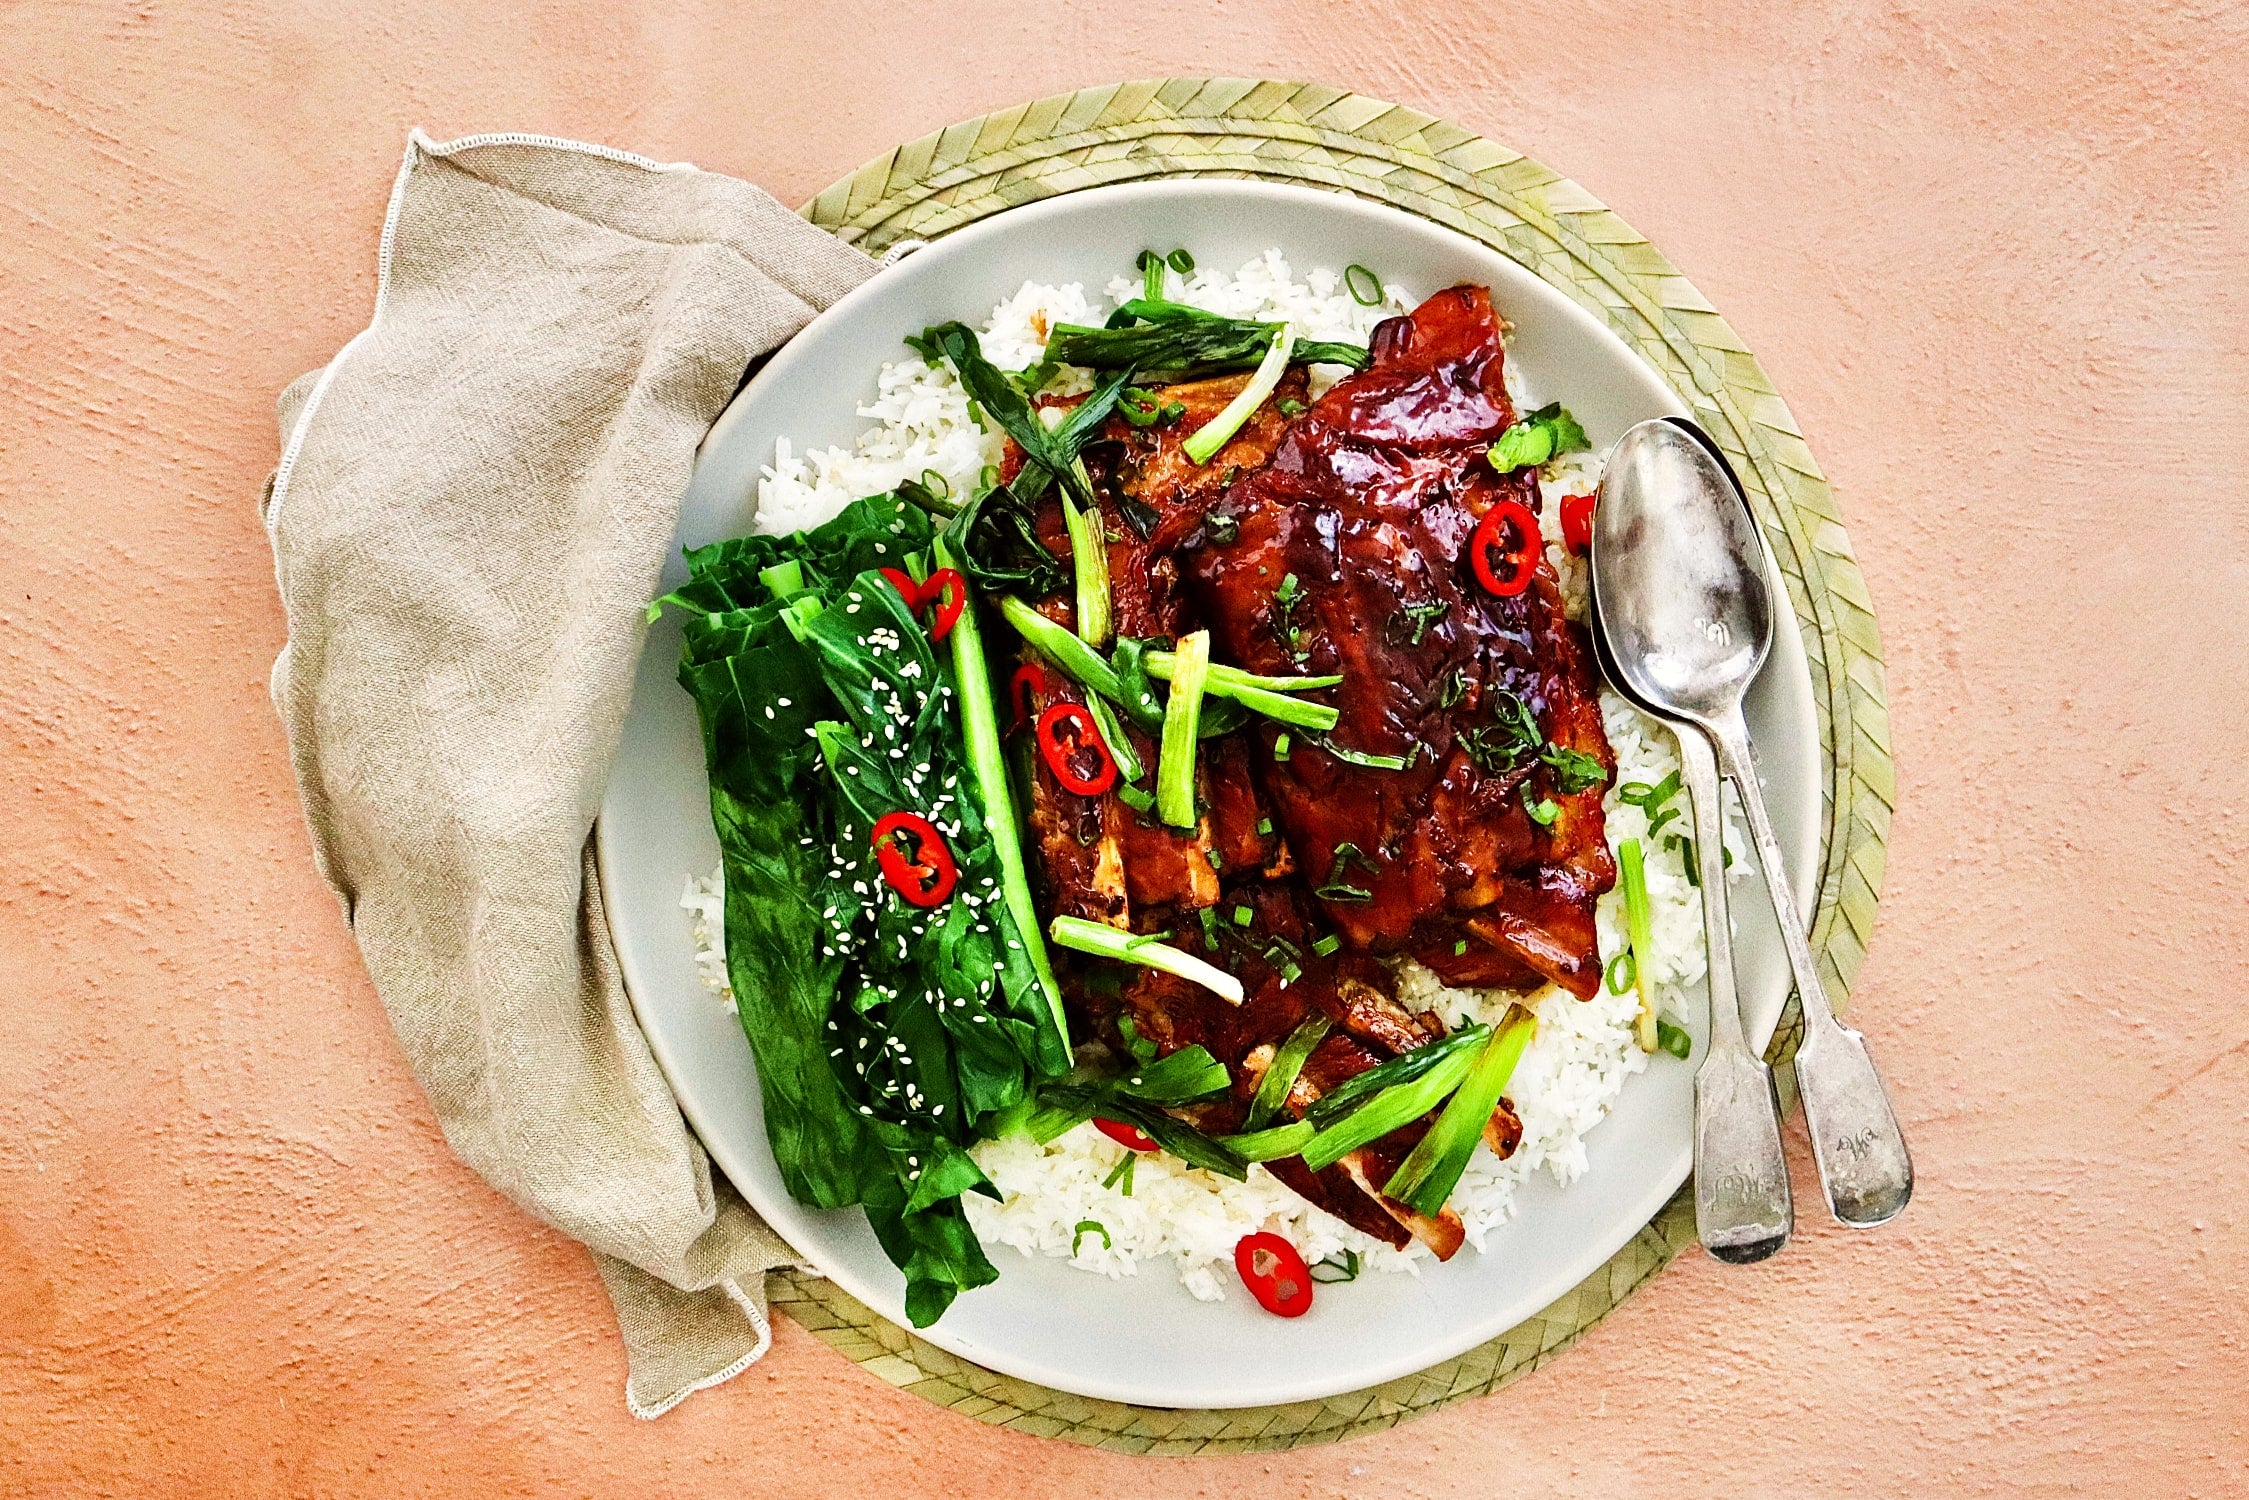 Slow cooked honey soy pork ribs on a bed of rice with a side of gai lan and garnished with sesame seeds and red chilli